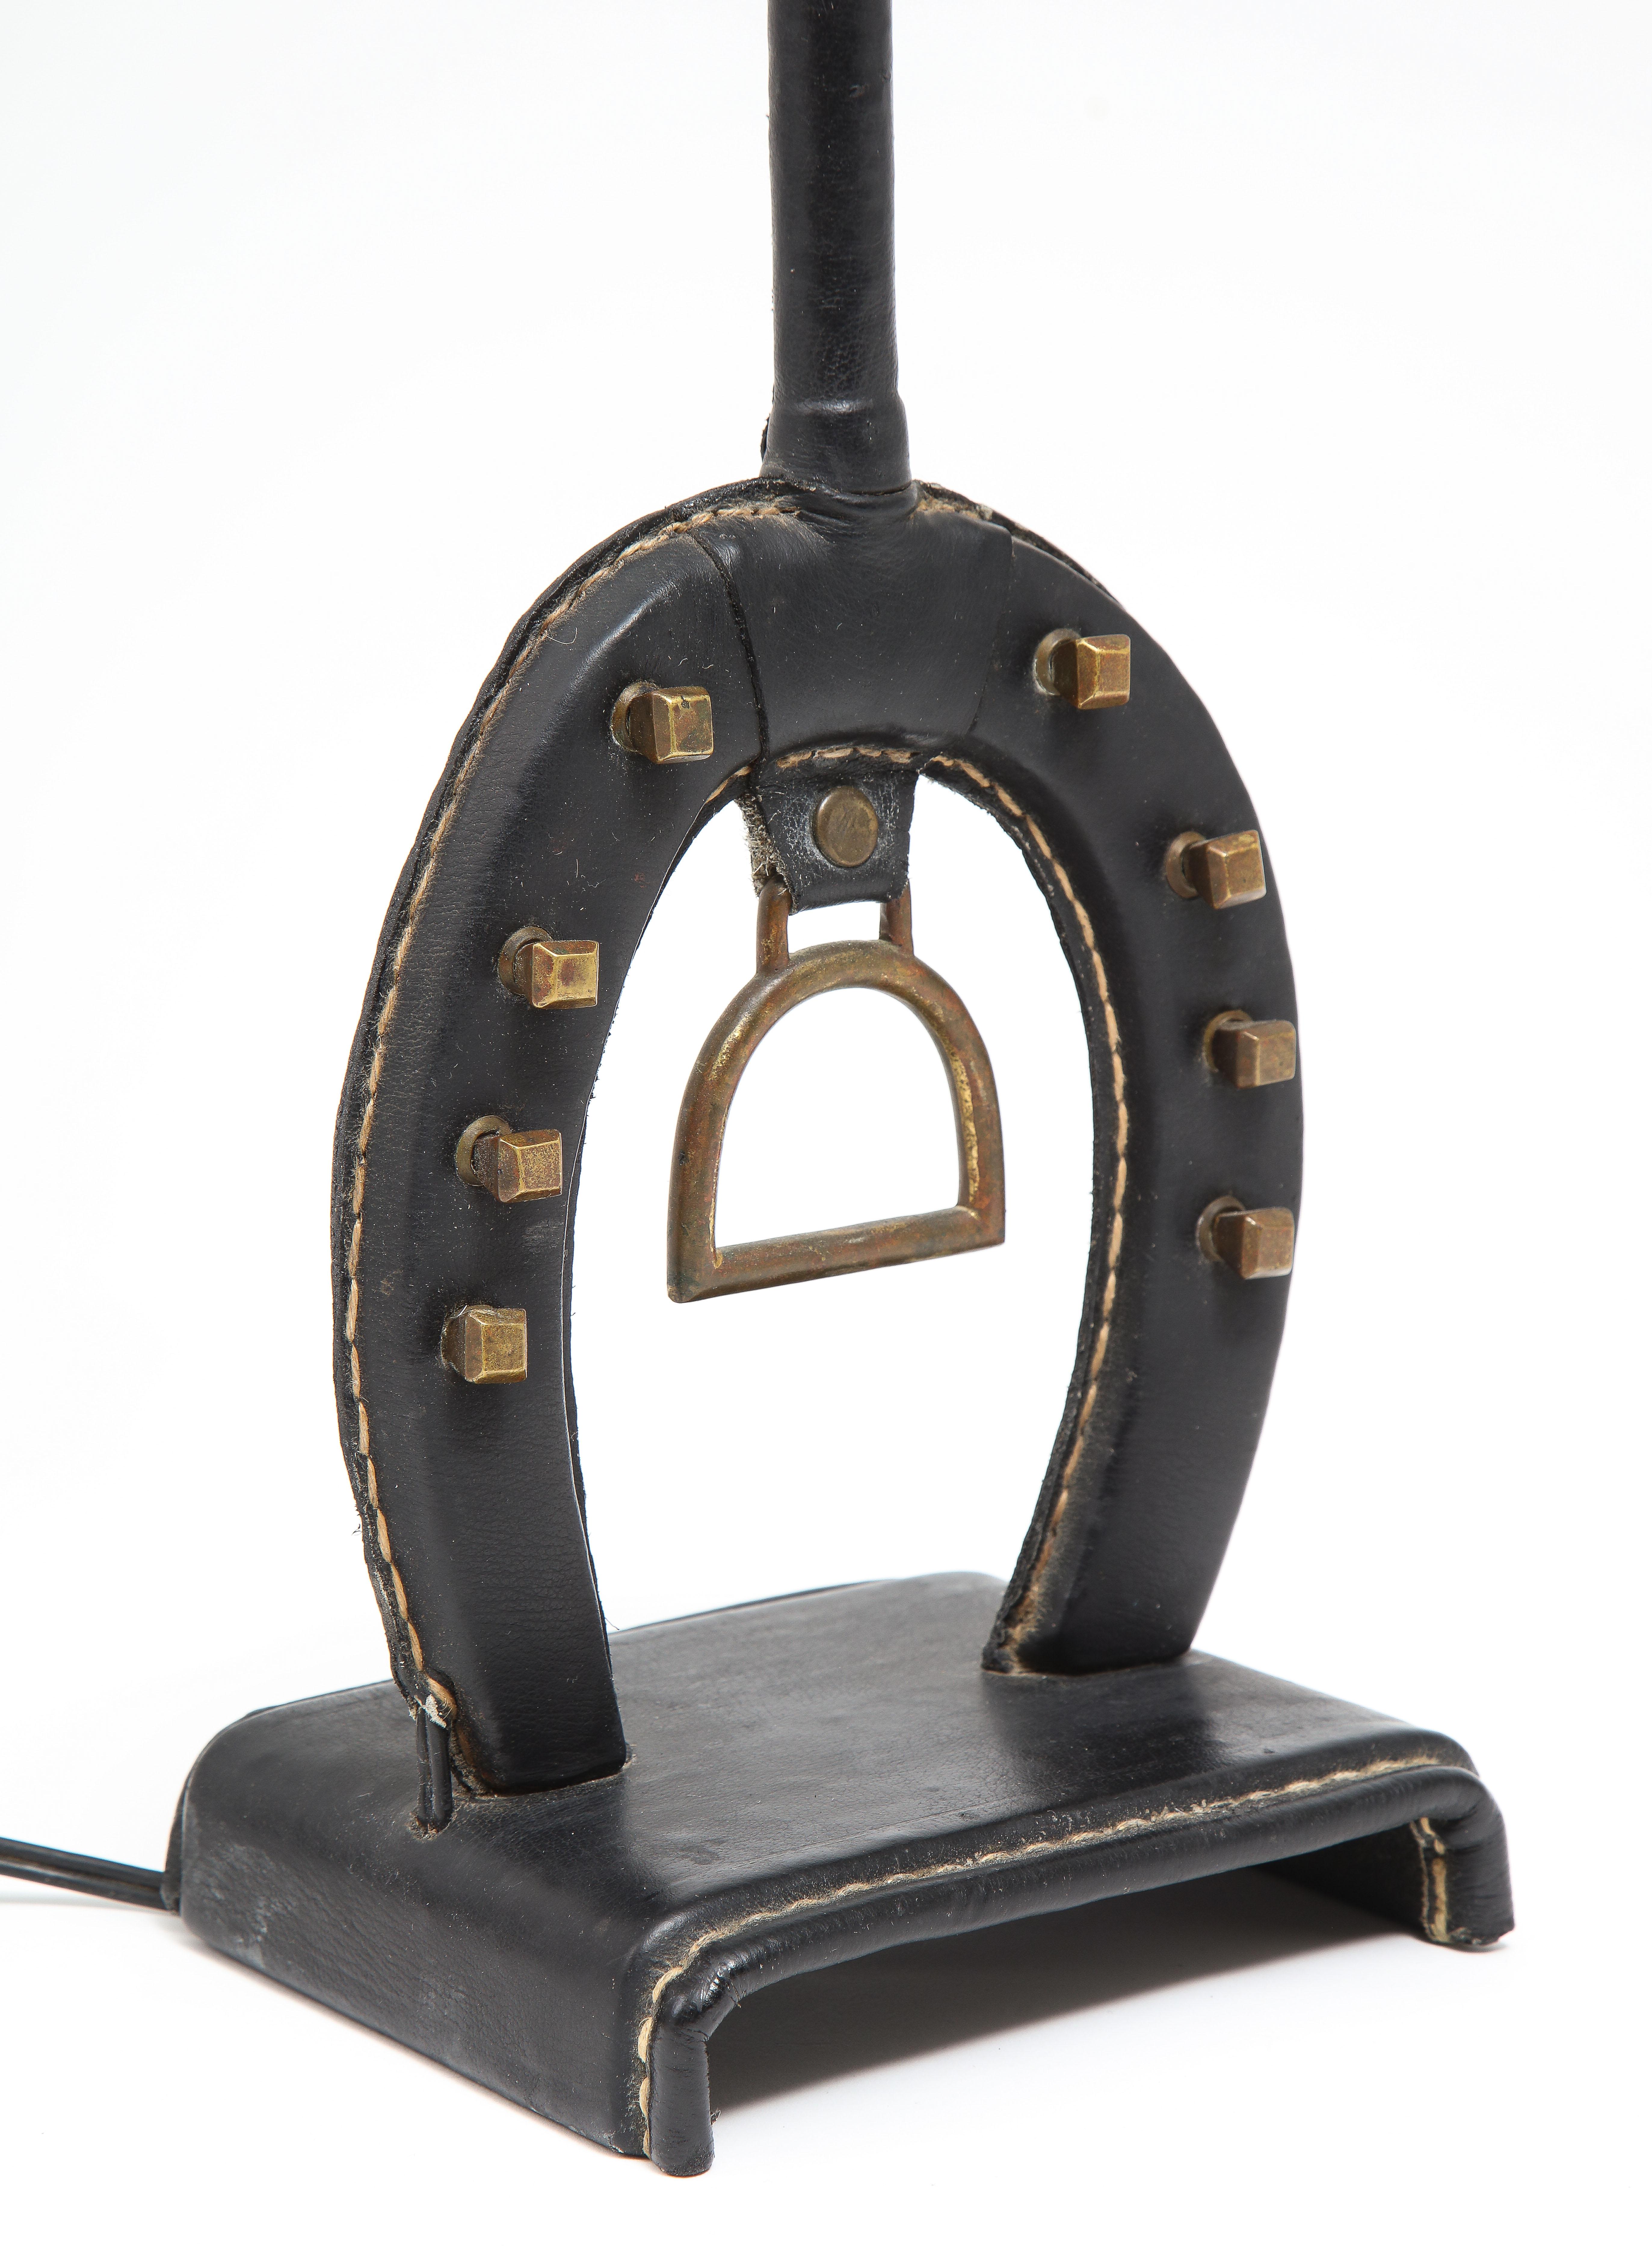 Jacques Adnet lamp with Equestrian theme, the body of the lamp is a horseshoe with its distinctive nail pattern in brass; it rests on a bent metal base, wrapped in Adnet distinctive stitched leather. Base only is 16x5x6. Shade is for photos only,